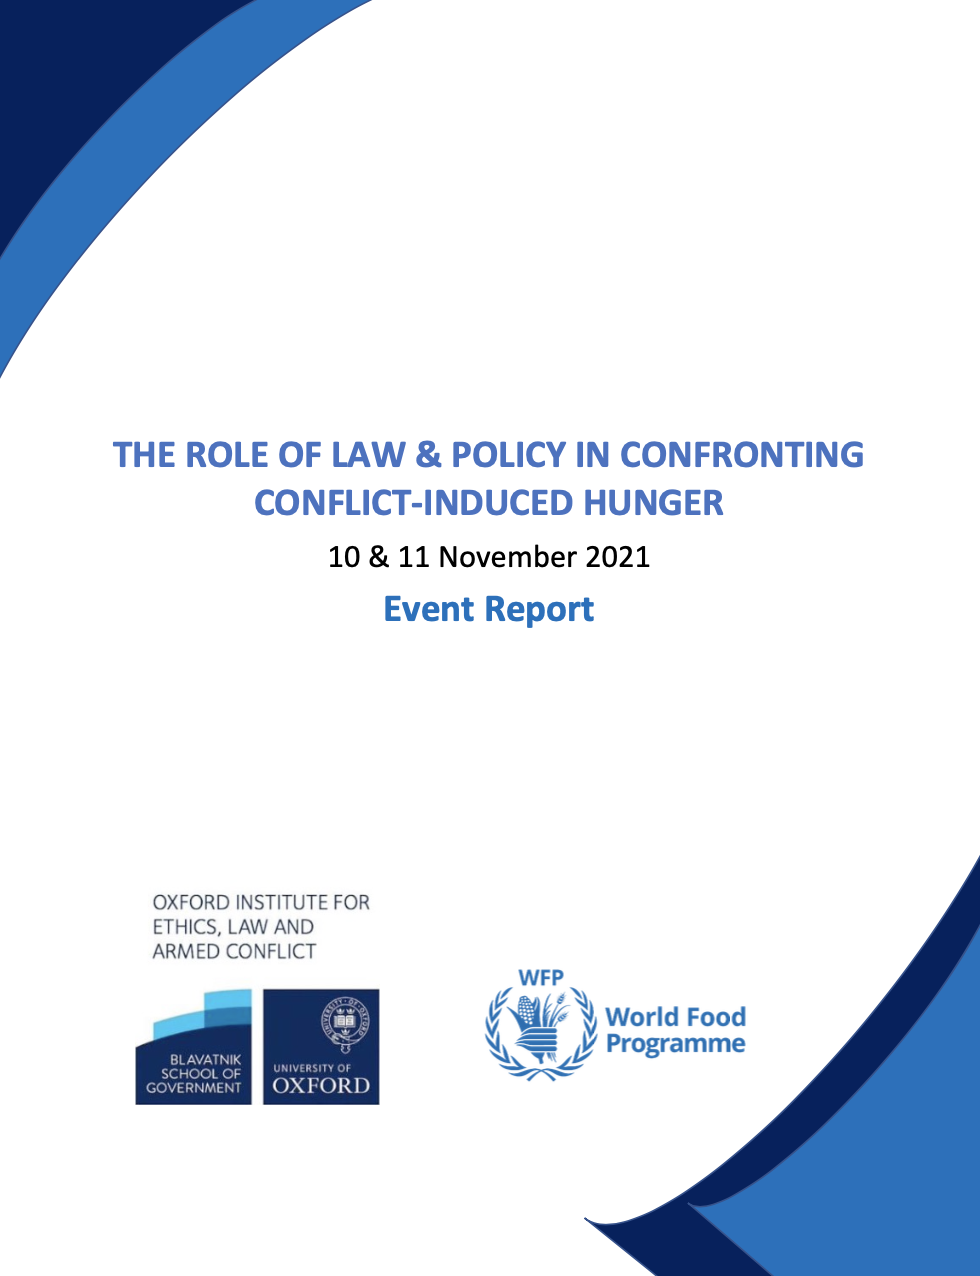 The Role of Law and Policy in Confronting Conflict-Induced Hunger